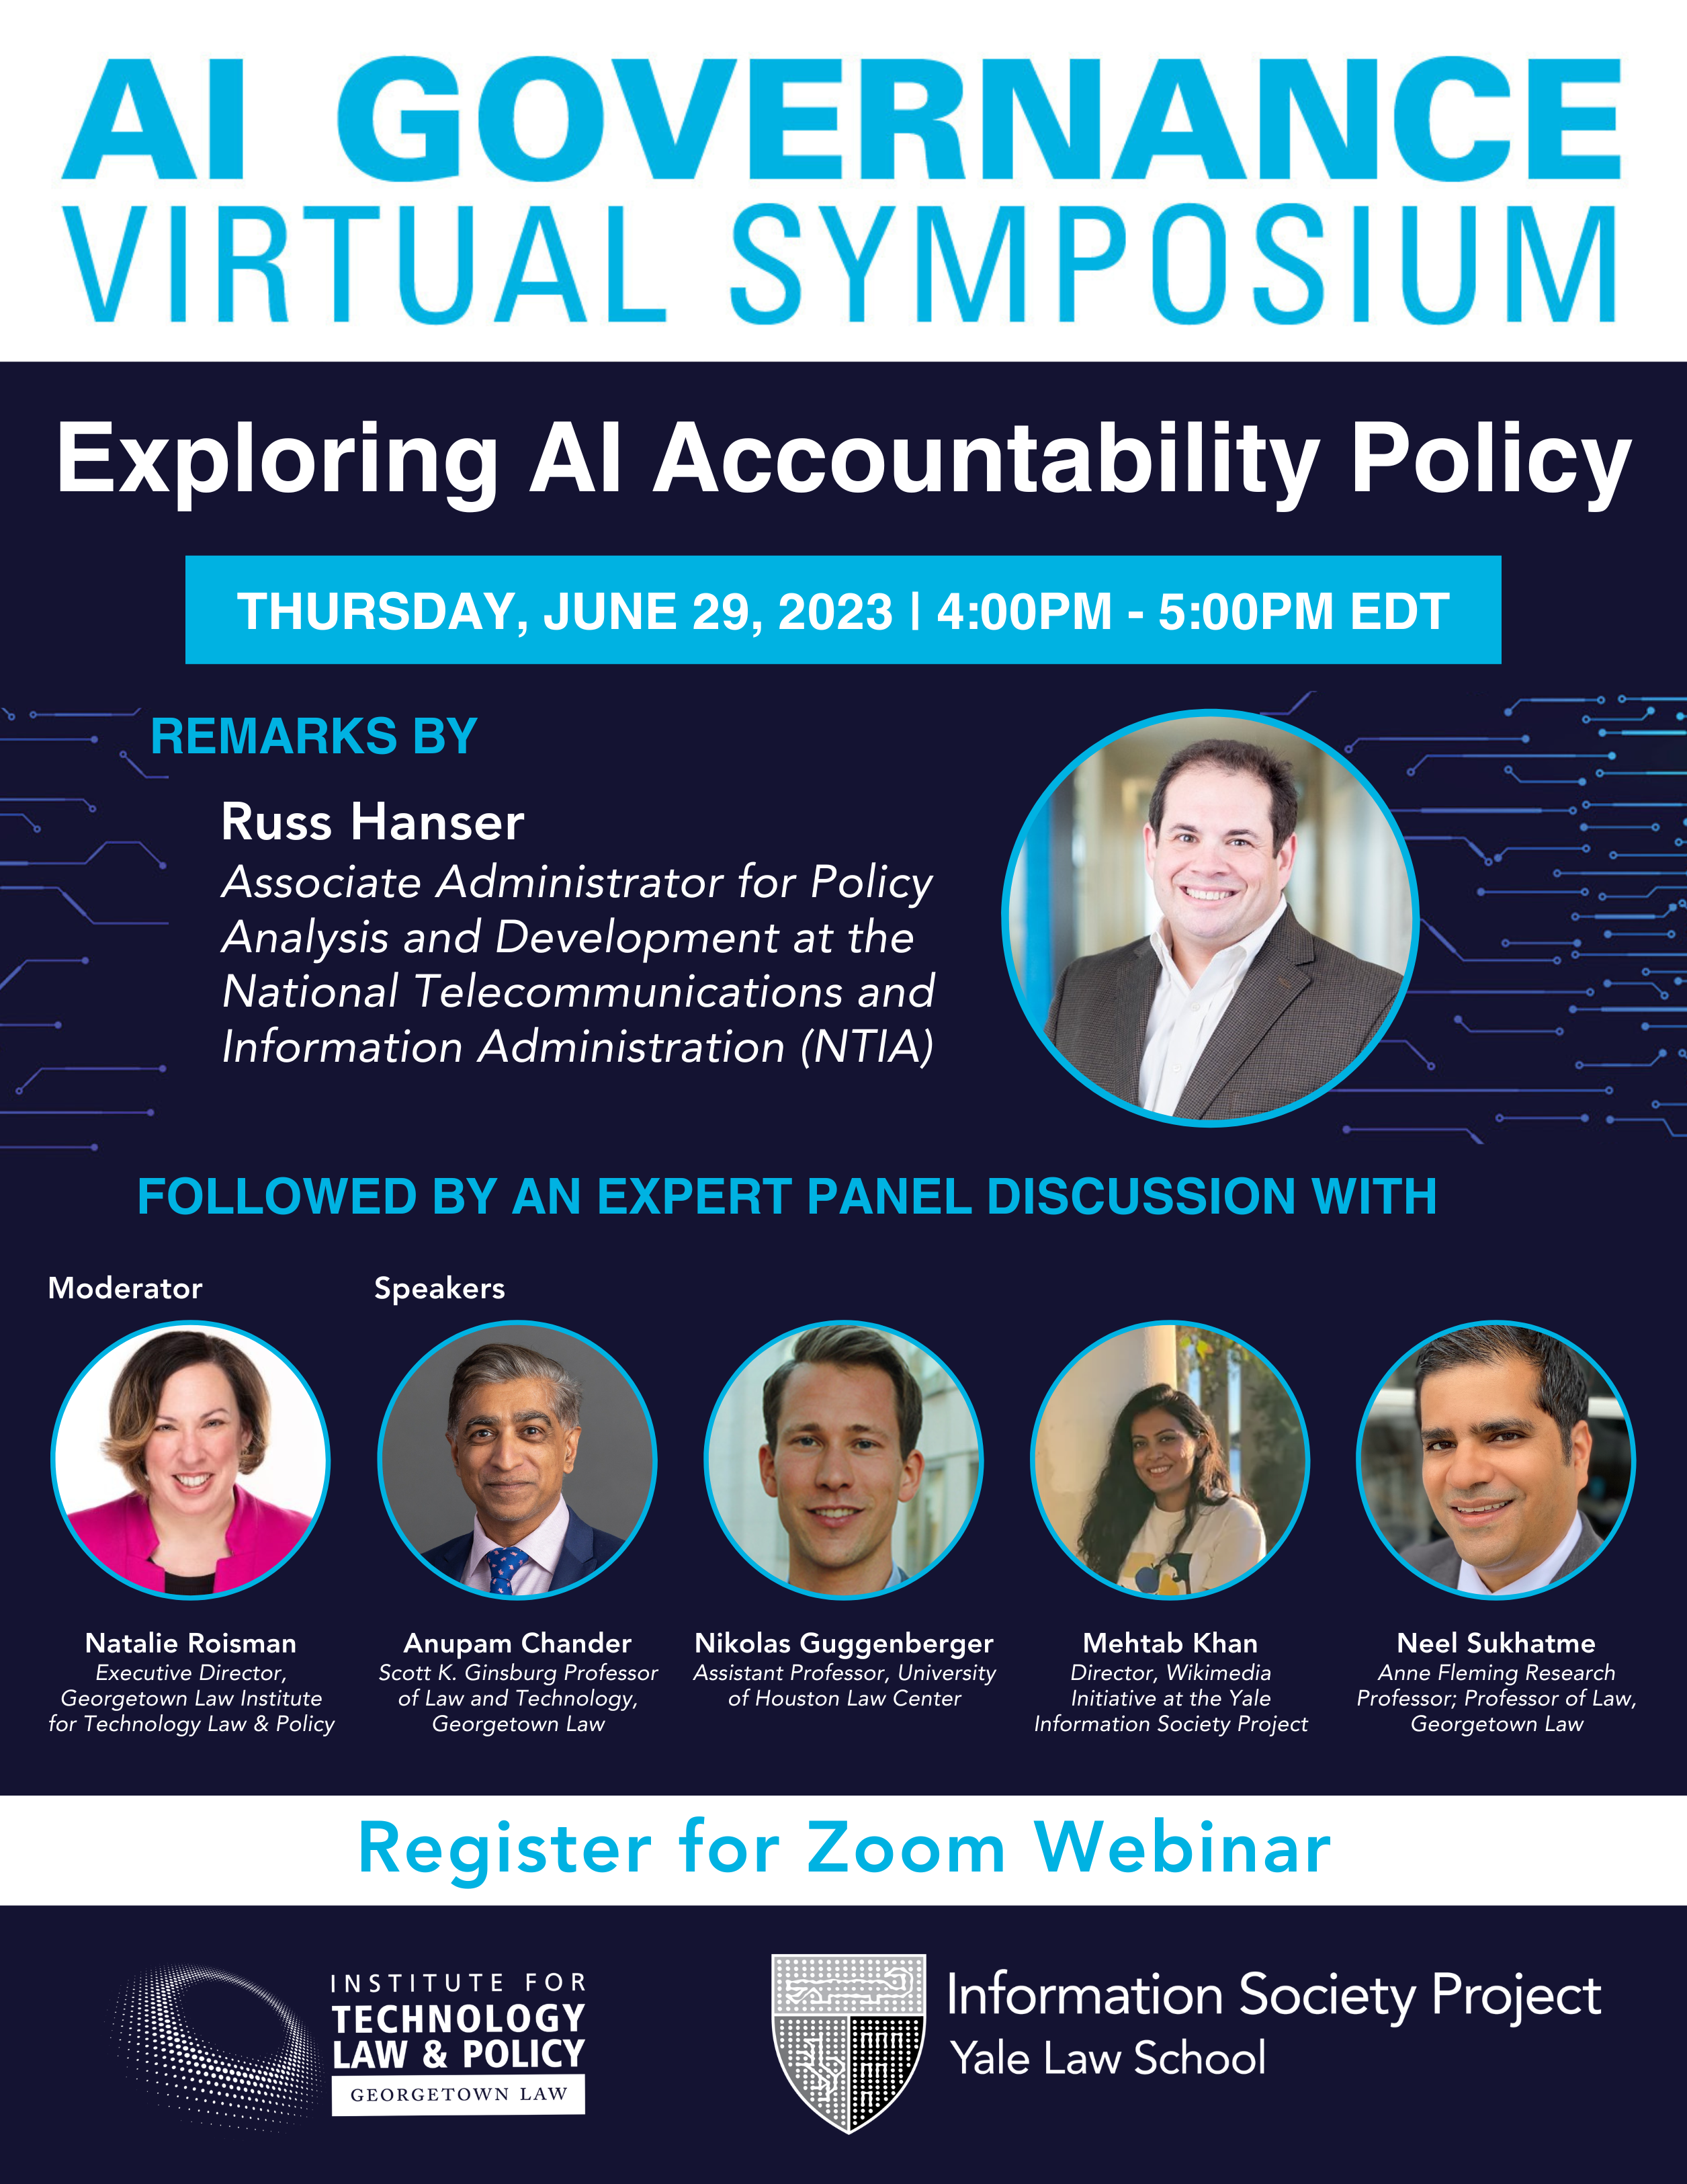 Flyer for the event: AI Governance Series: Exploring AI Accountability Policy with Russ Hanser, NTIA Associate Administrator for Policy Analysis and Development